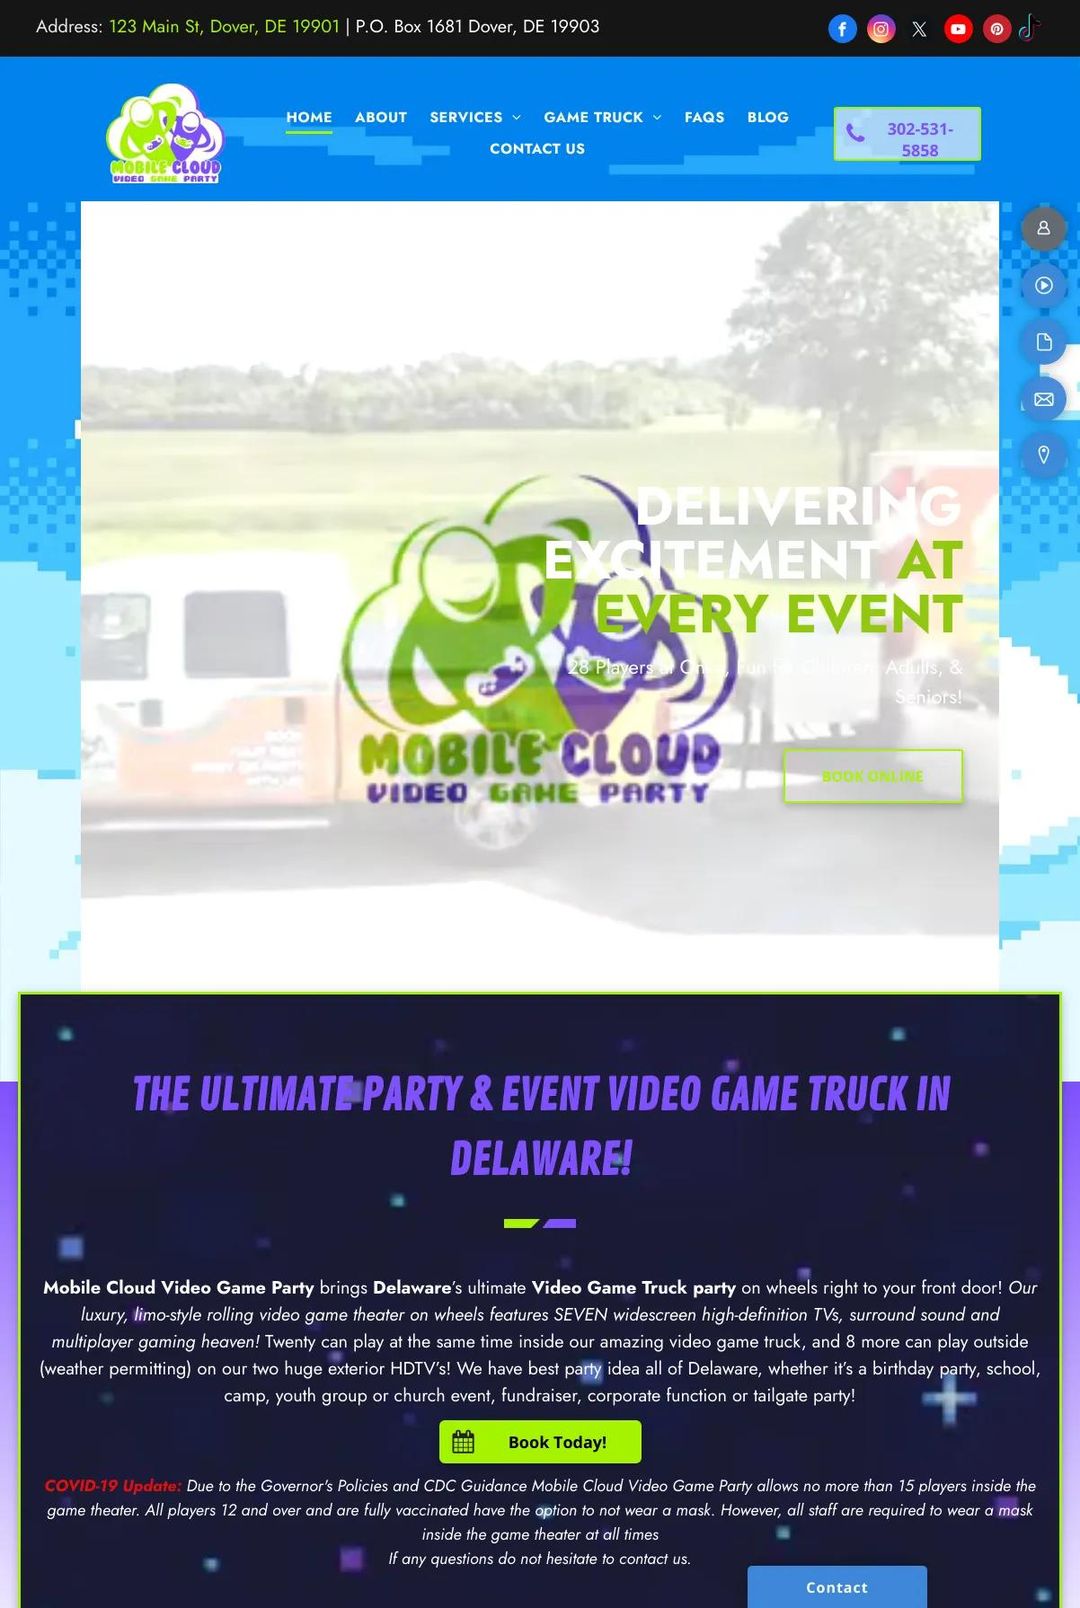 Screenshot 1 of Mobile Cloud Video Game Party (Example Duda Website)